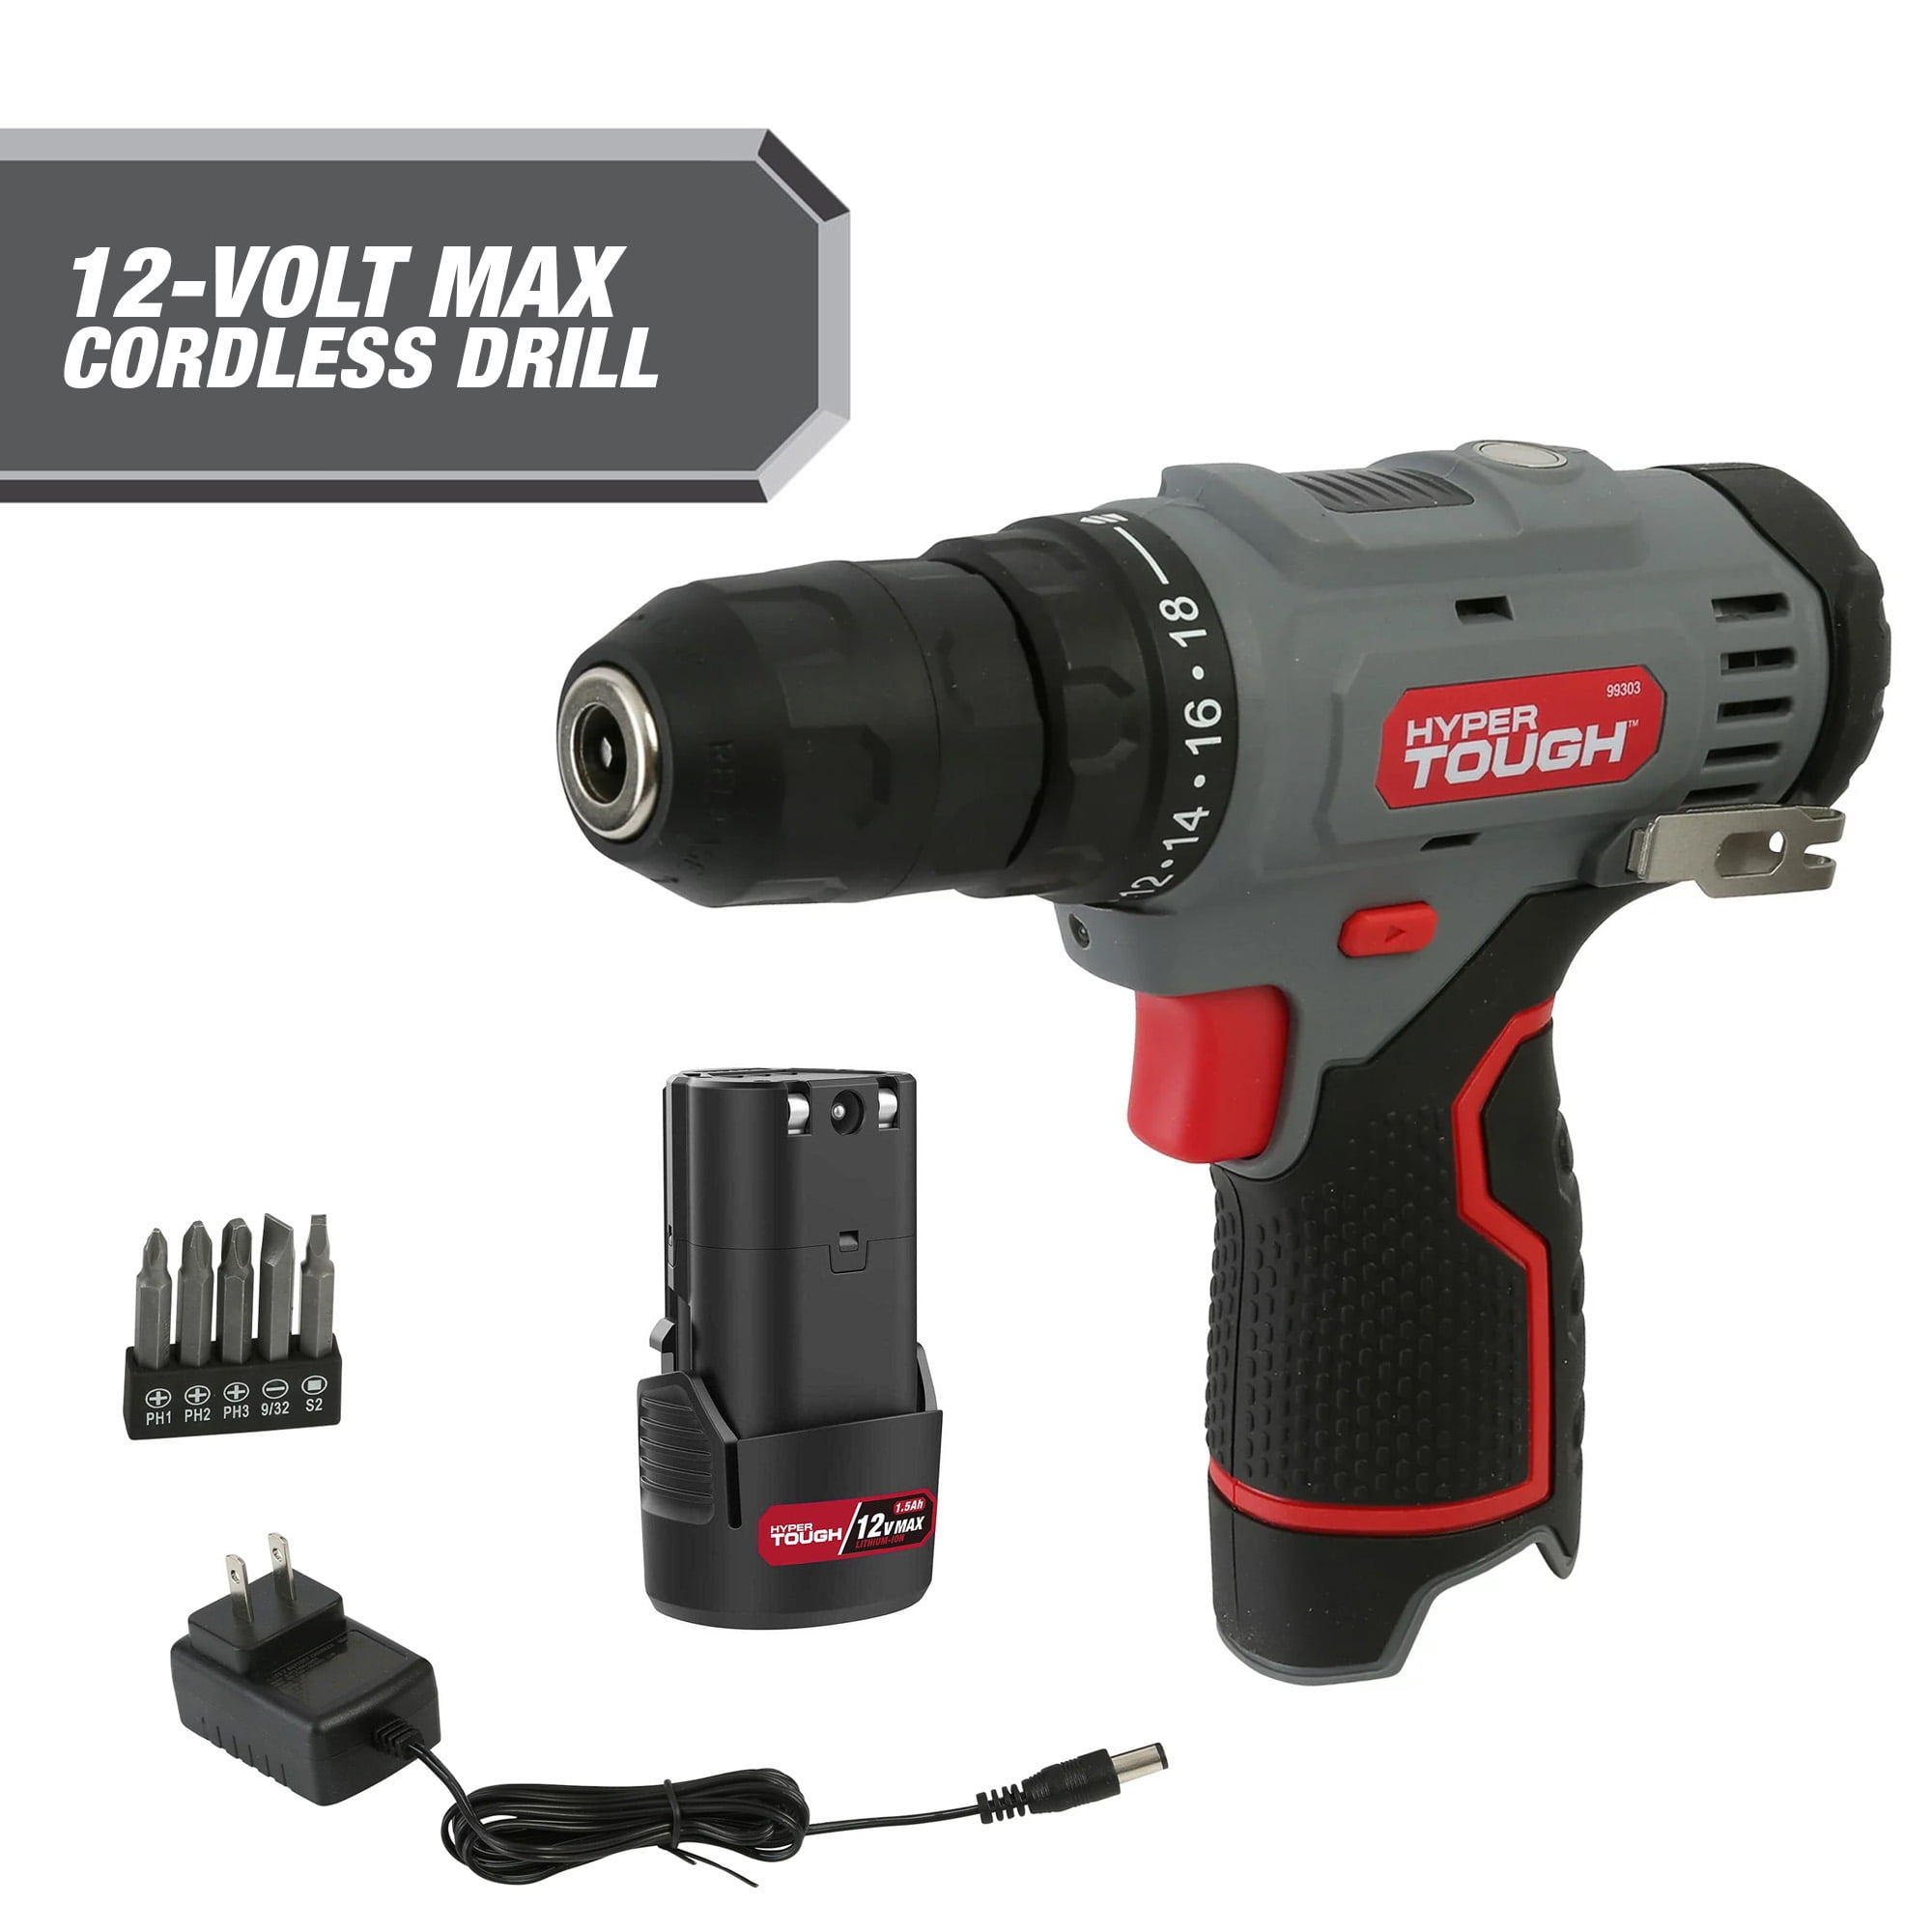 18V Cordless Drill Driver With 2x 1.5Ah Batteries, Fast Charger and 80  Accessories in Storage Case